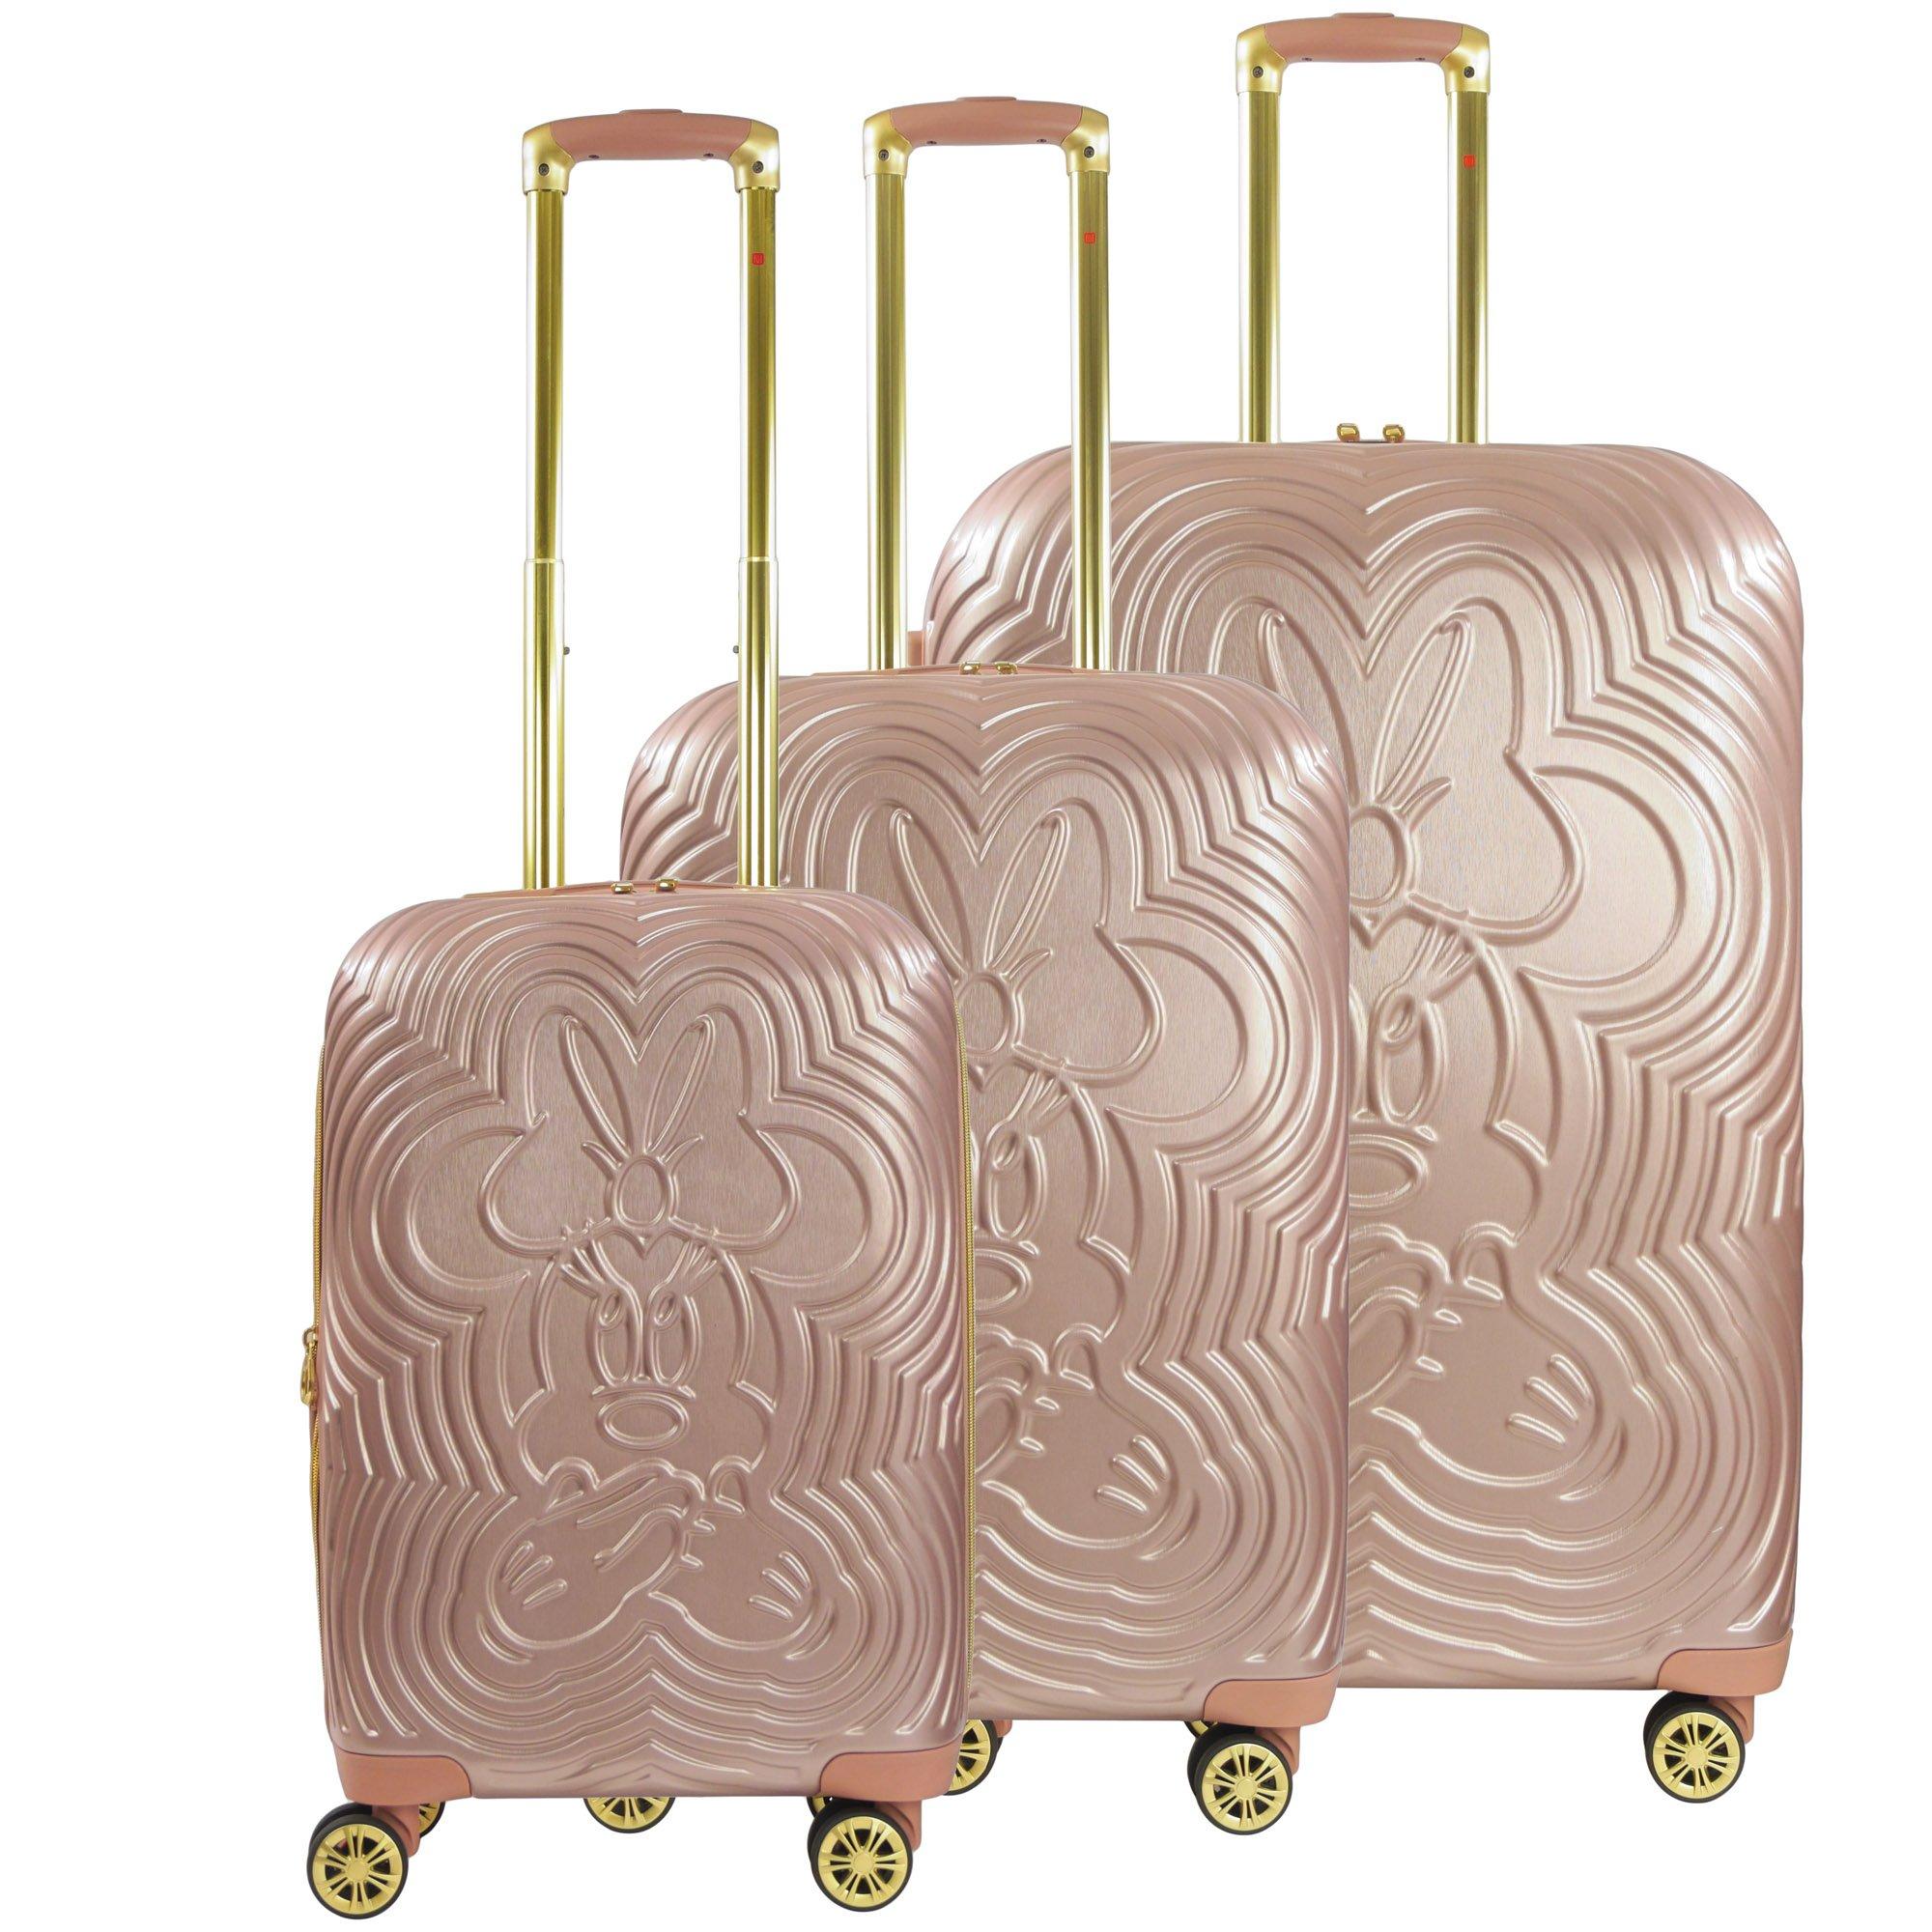 FUL Disney Minnie Mouse Playful Molded Hard-Sided Roller Luggage 3-Piece Set - Rose Gold, Concept One, Rosegold